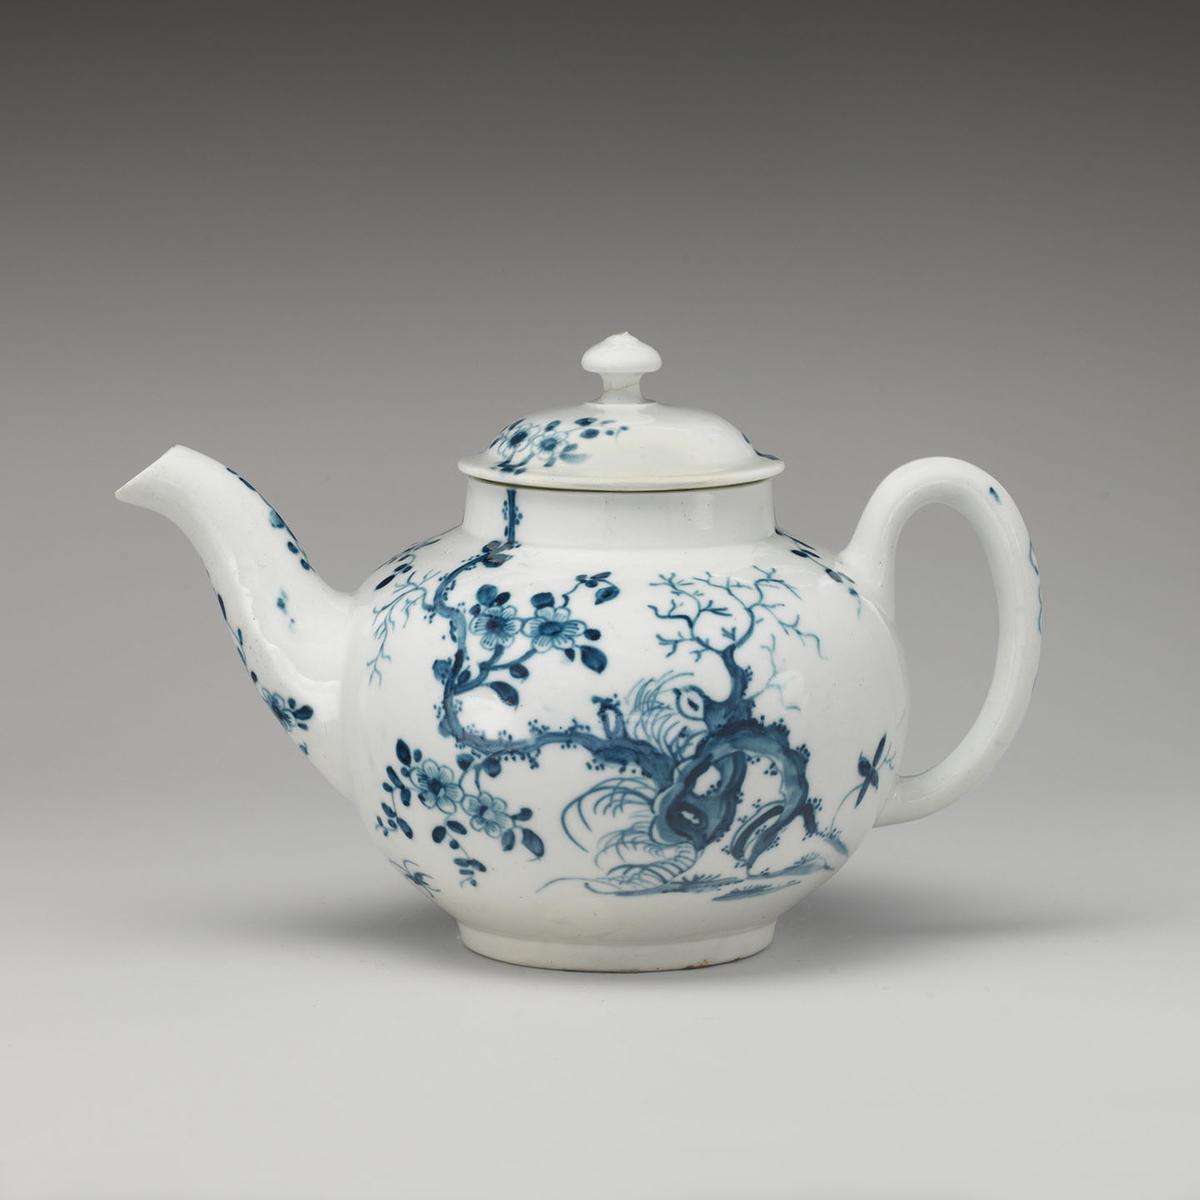 A British teapot, circa 1770, by the Worcester factory. Soft-paste porcelain with blue underglaze; 4 1/2 inches. The Metropolitan Museum of Art, New York City. (Public Domain)